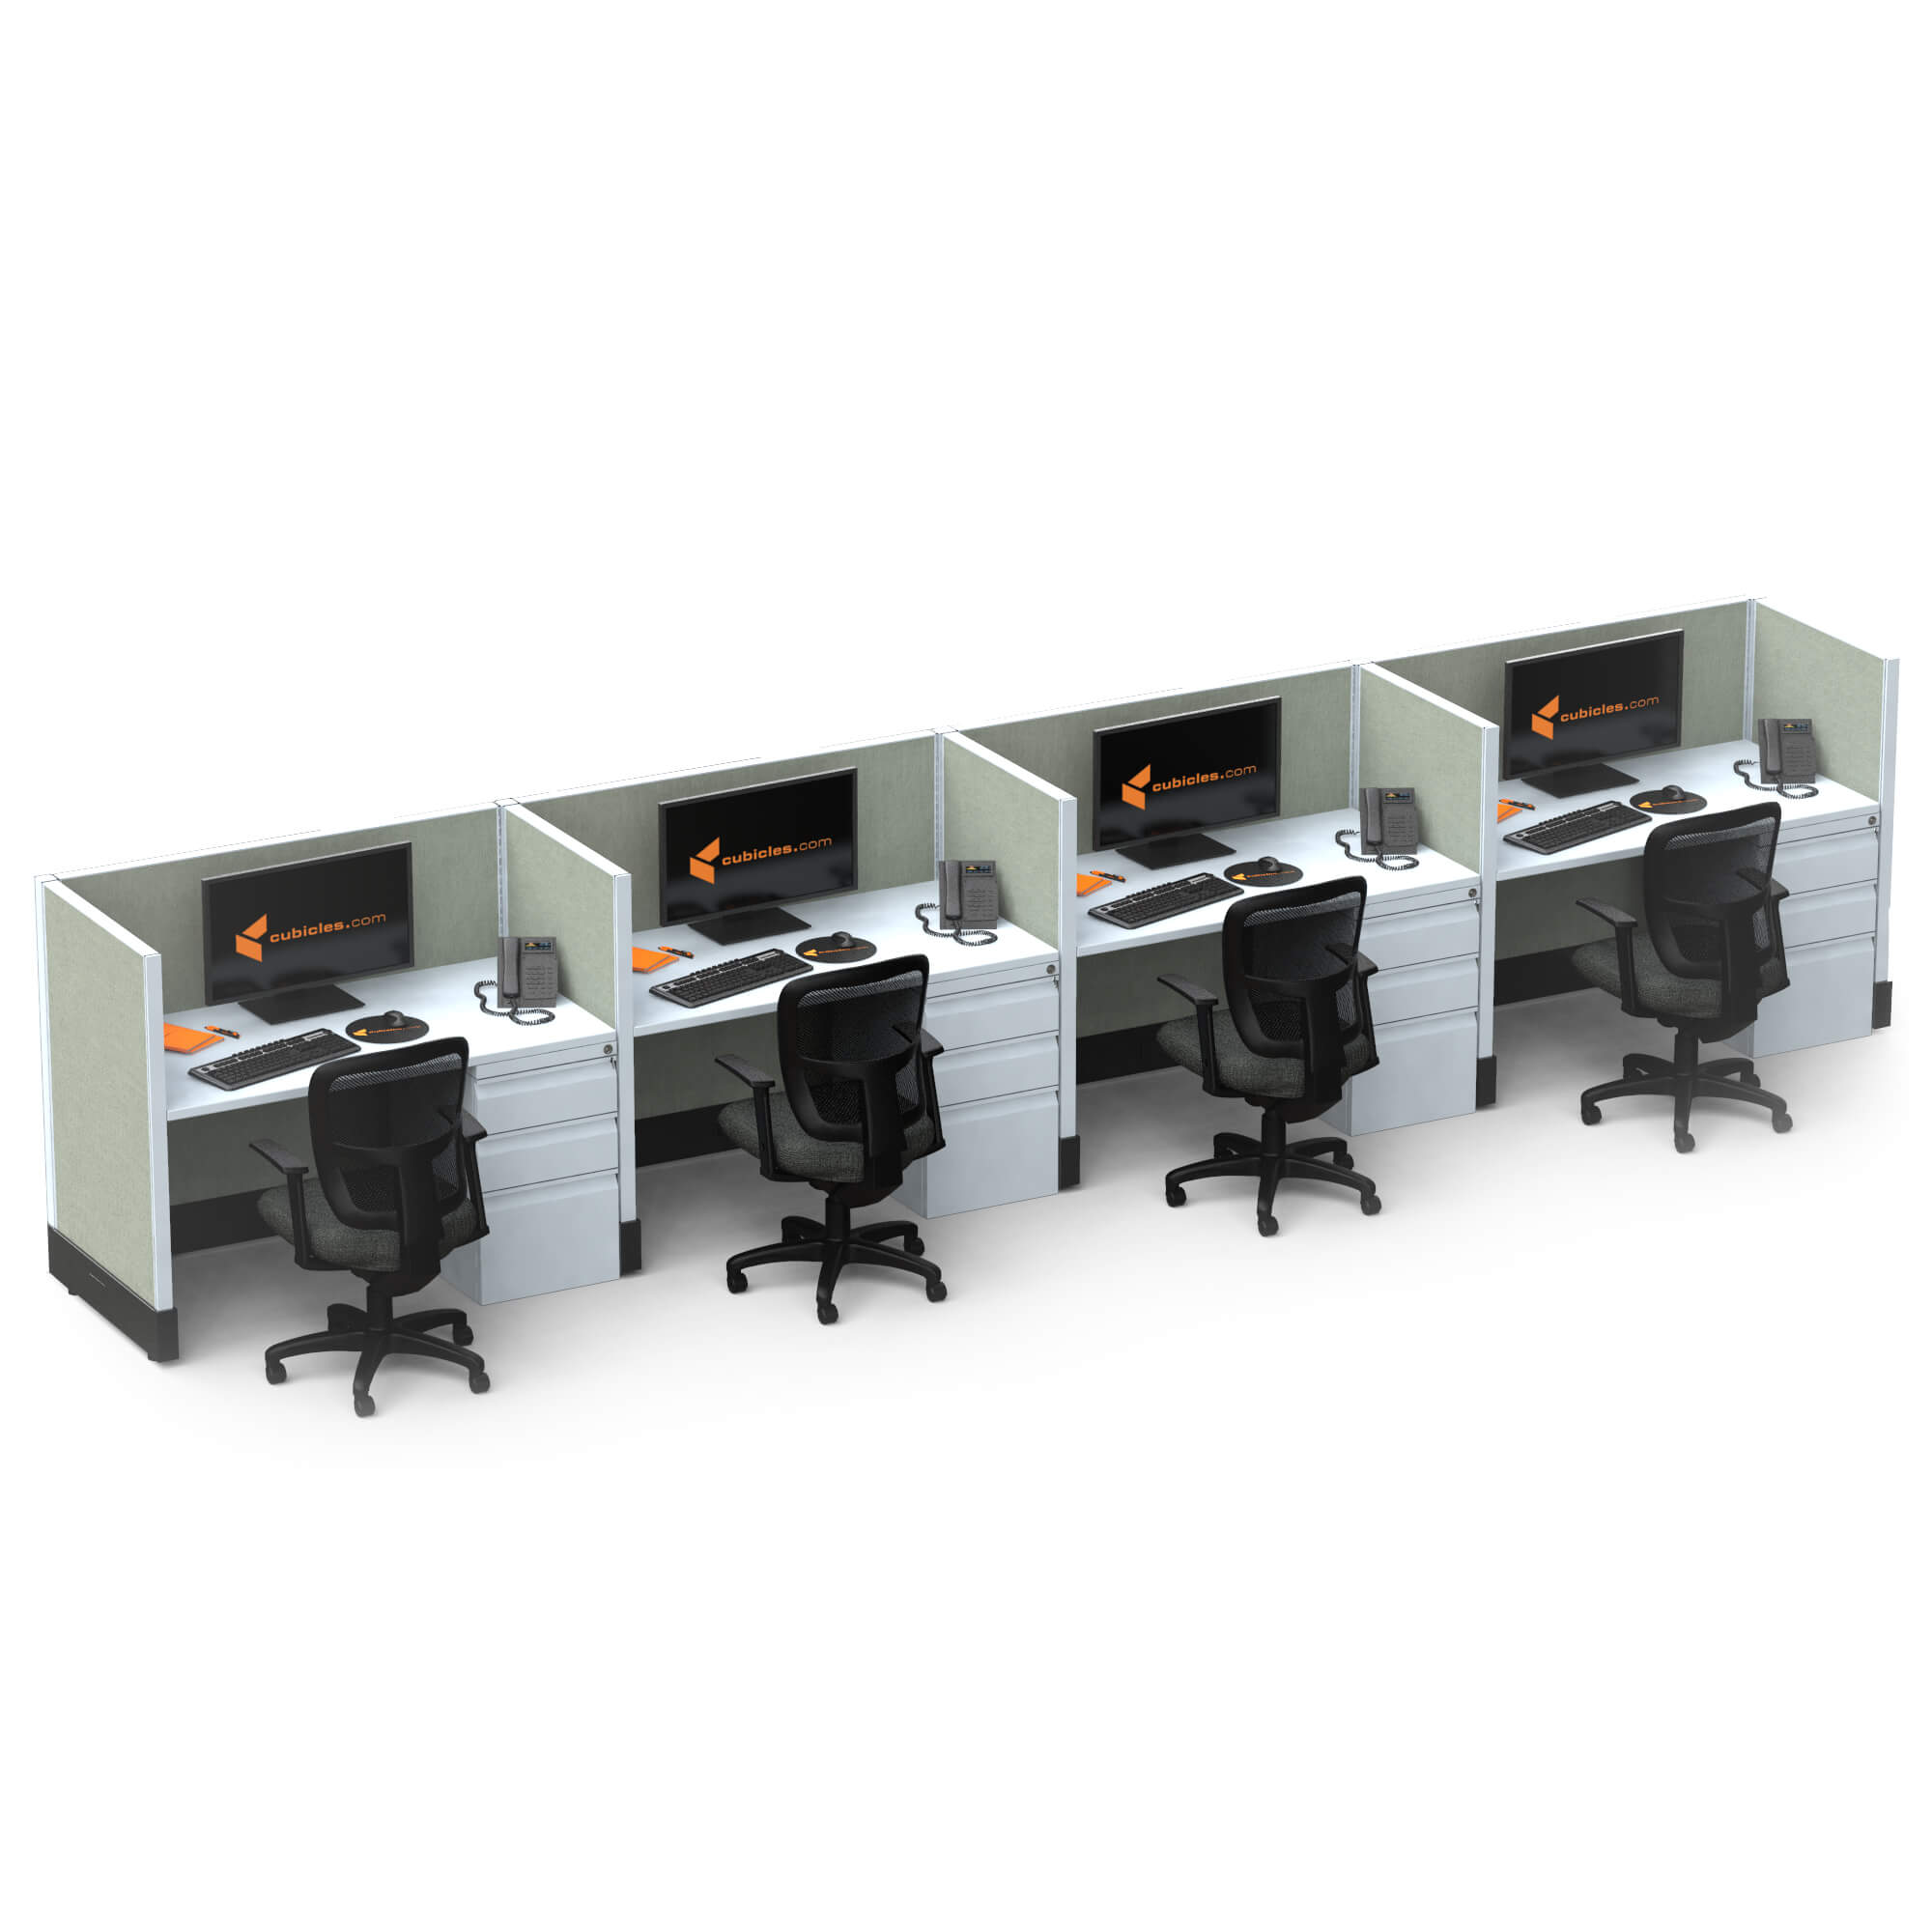 hot-desking-small-office-cubicles-4i-pack.jpg